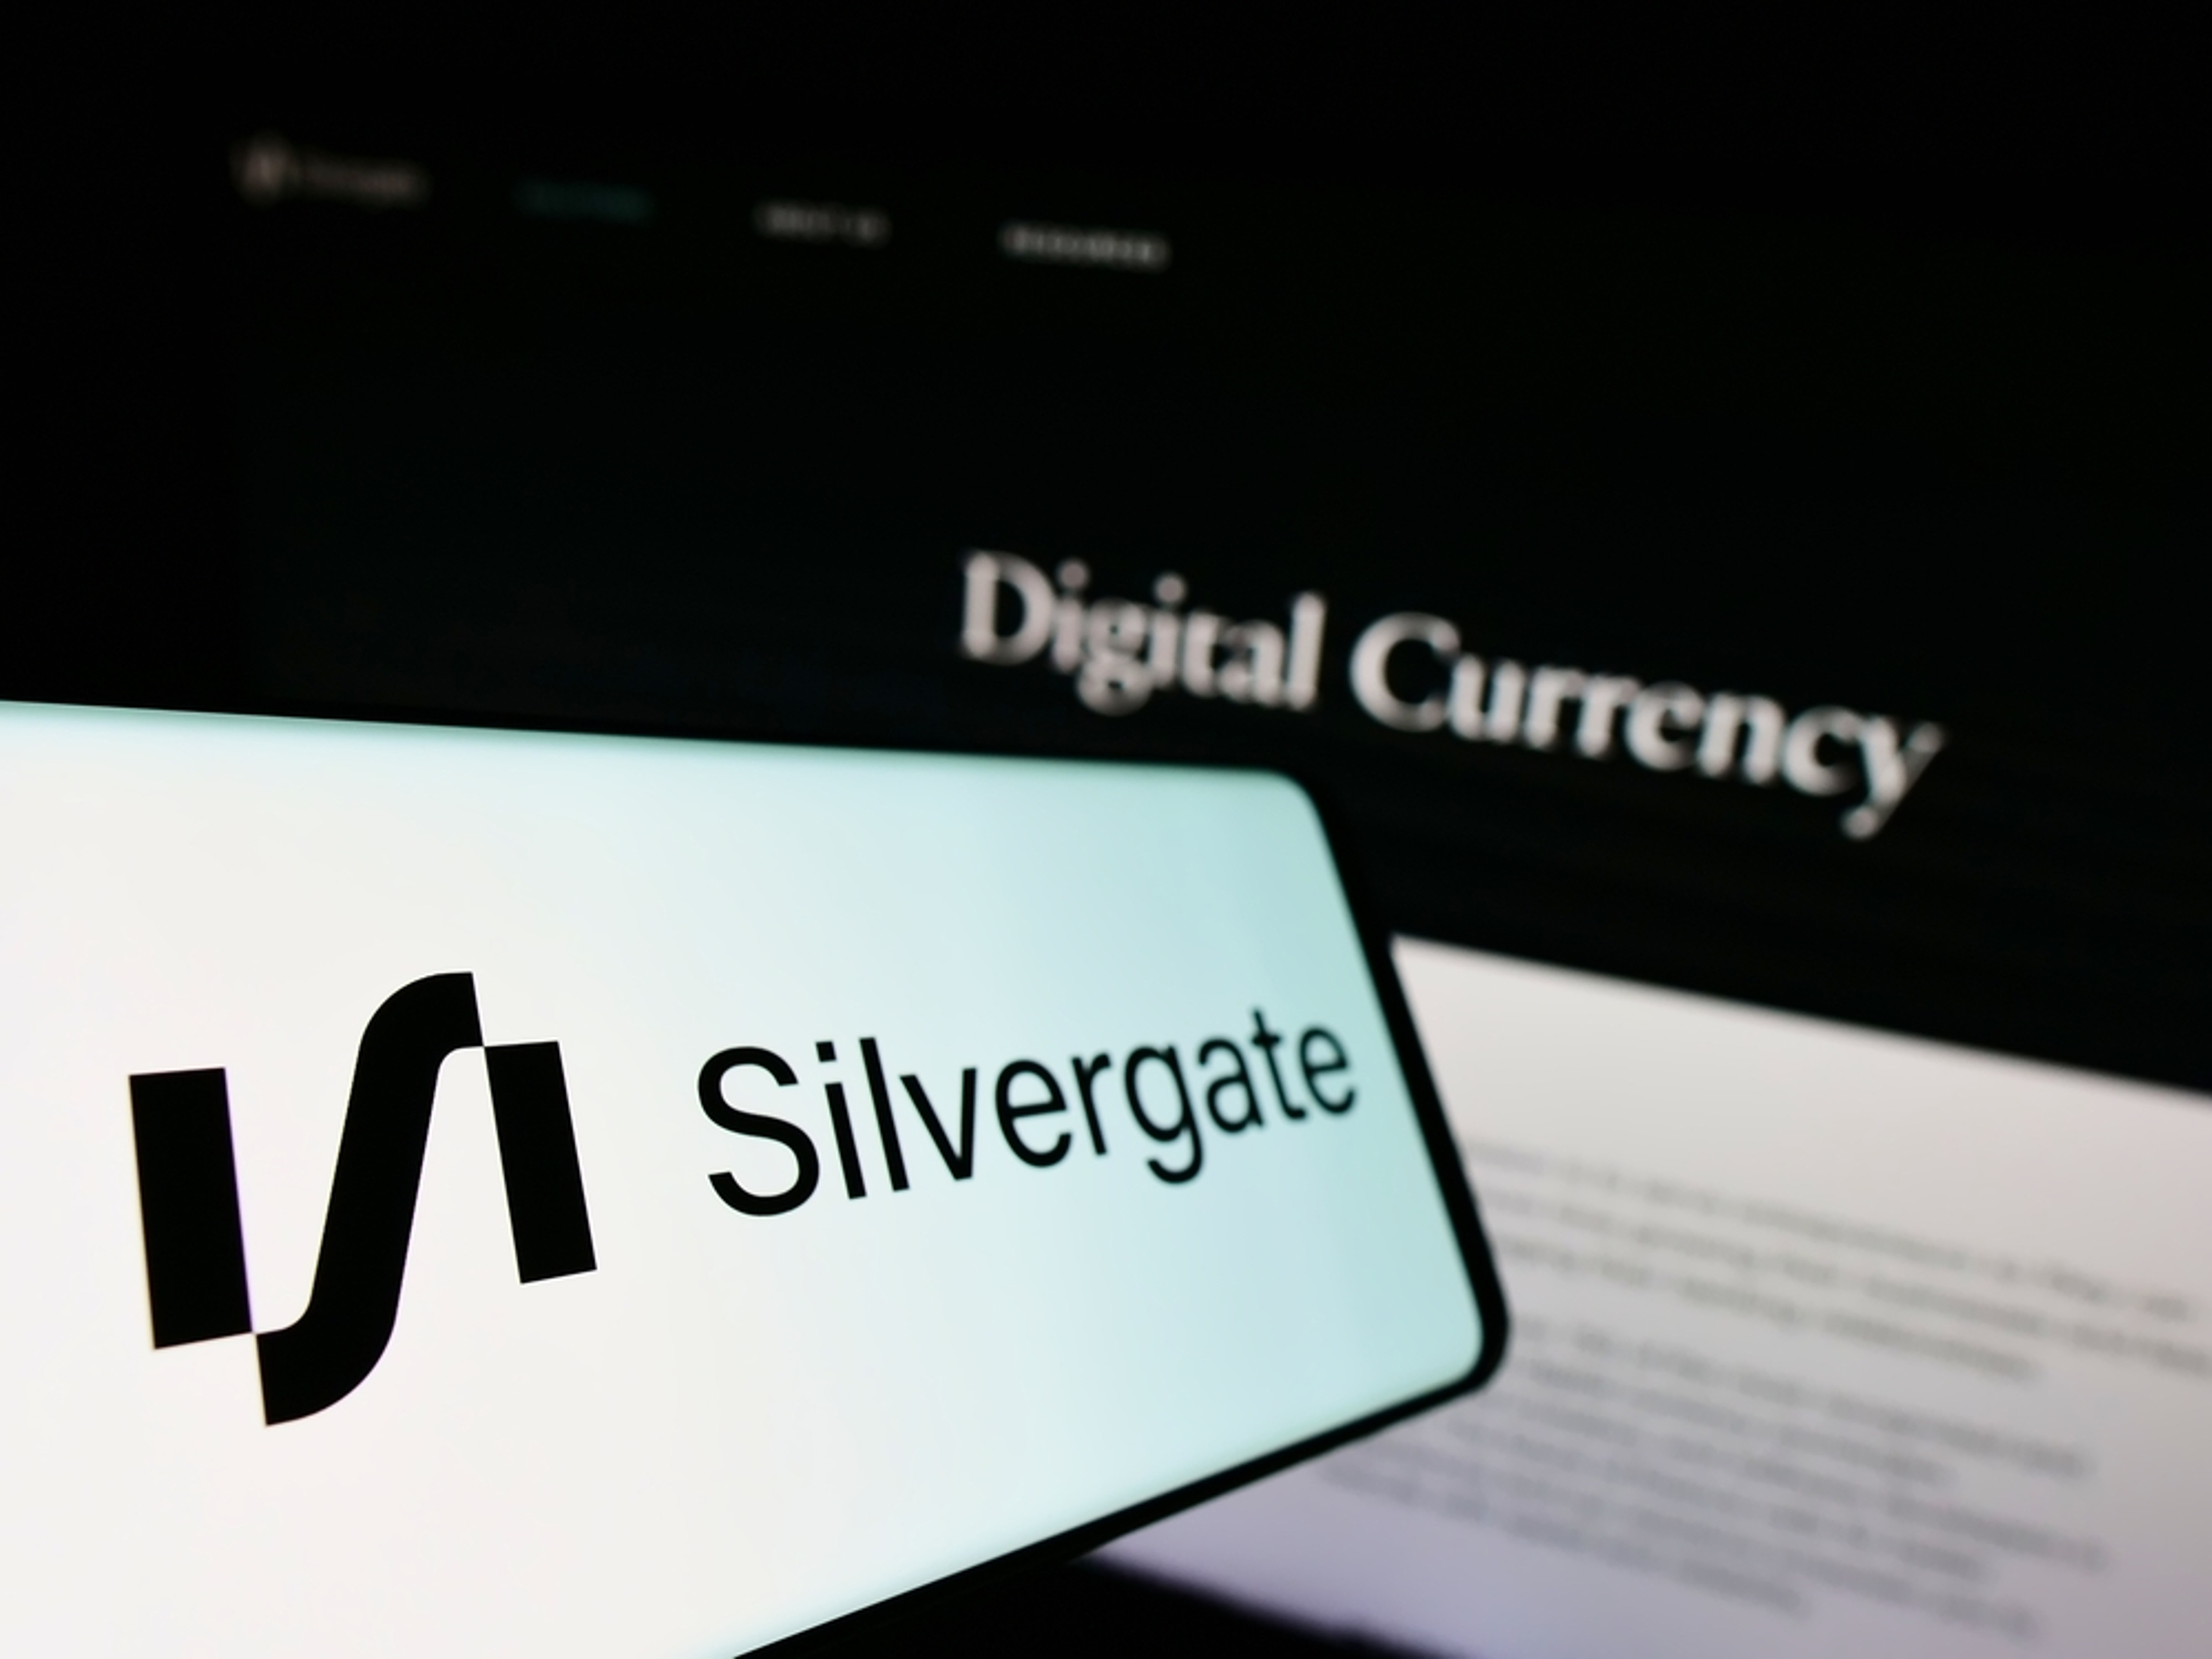 Silvergate Capital Stock&#39;s February Expiration Has Options Trader Seeing This Much Downside